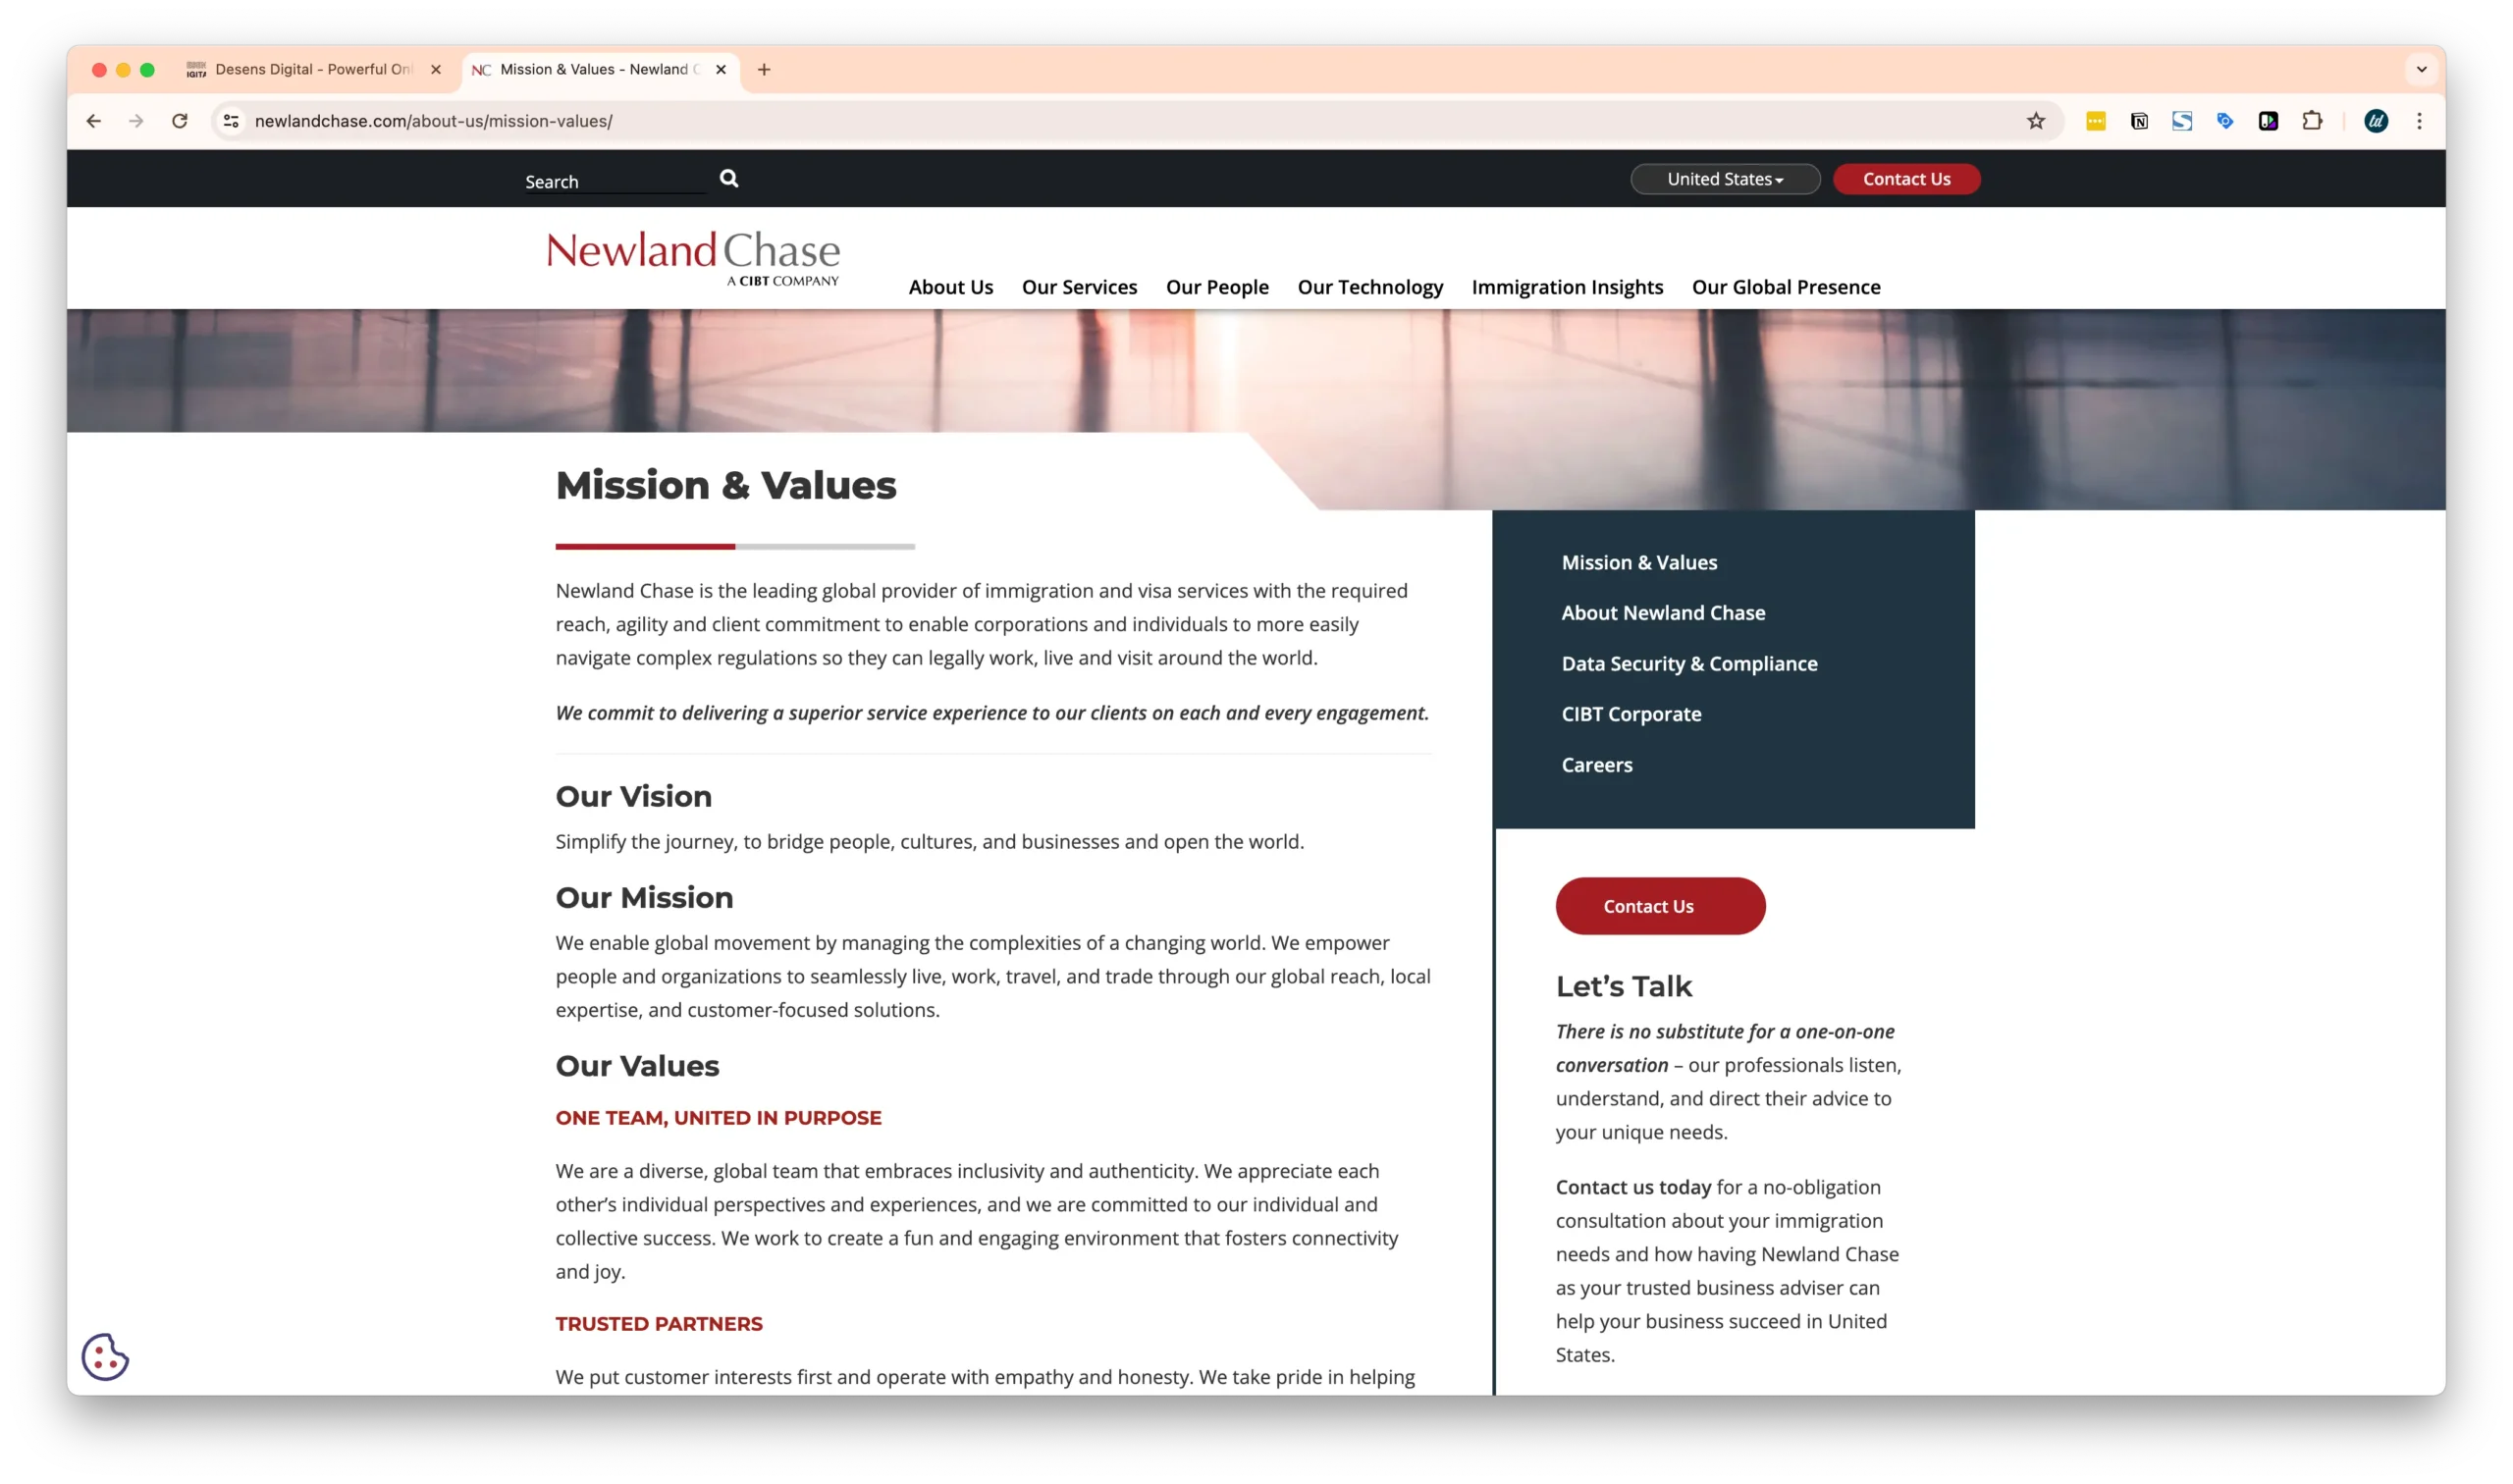 A webpage from Newland Chase detailing their mission and values. The navigation menu on the right includes sections about the company, data security, and careers, while the main content emphasizes their vision, mission, and customer-focused values.